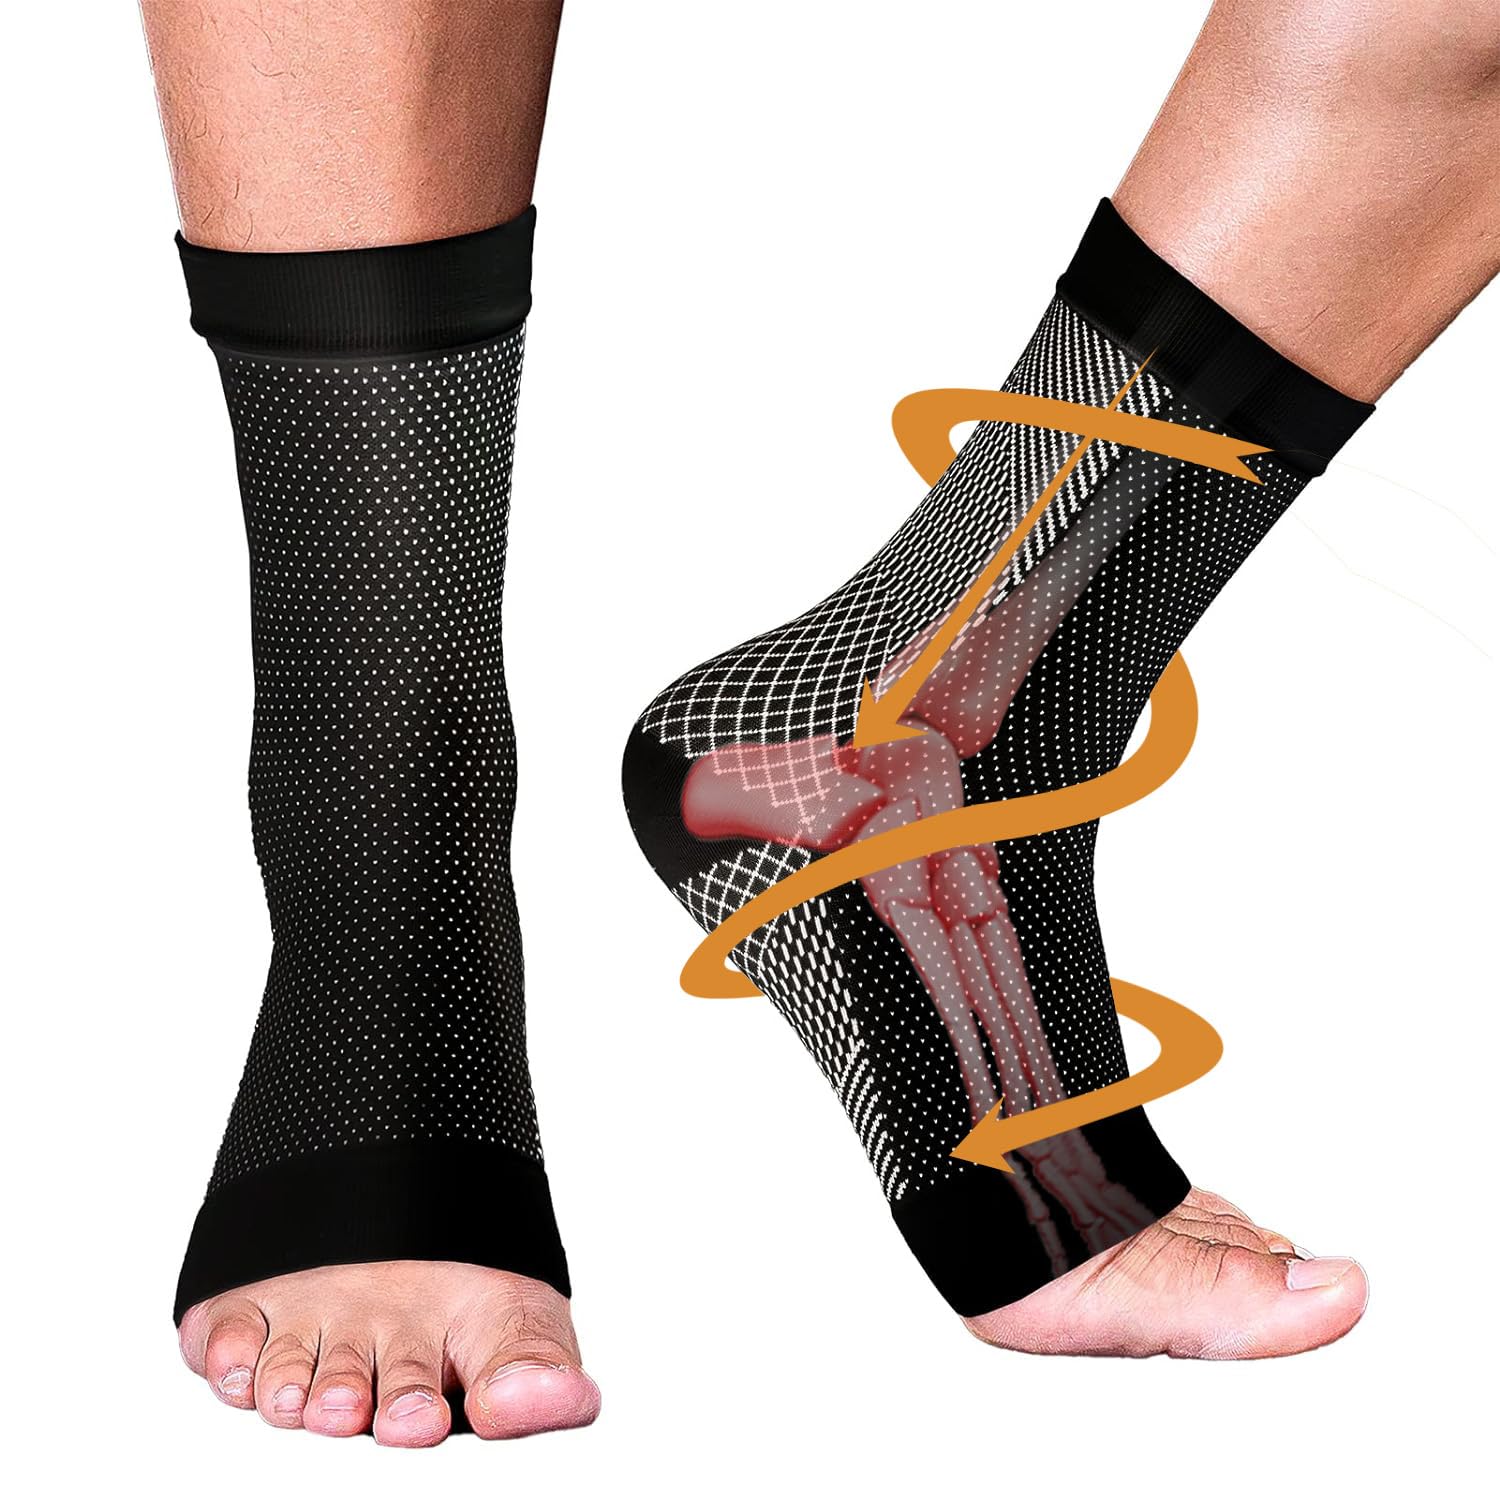 4 Pairs of Premium Therapy Socks For Men and Women